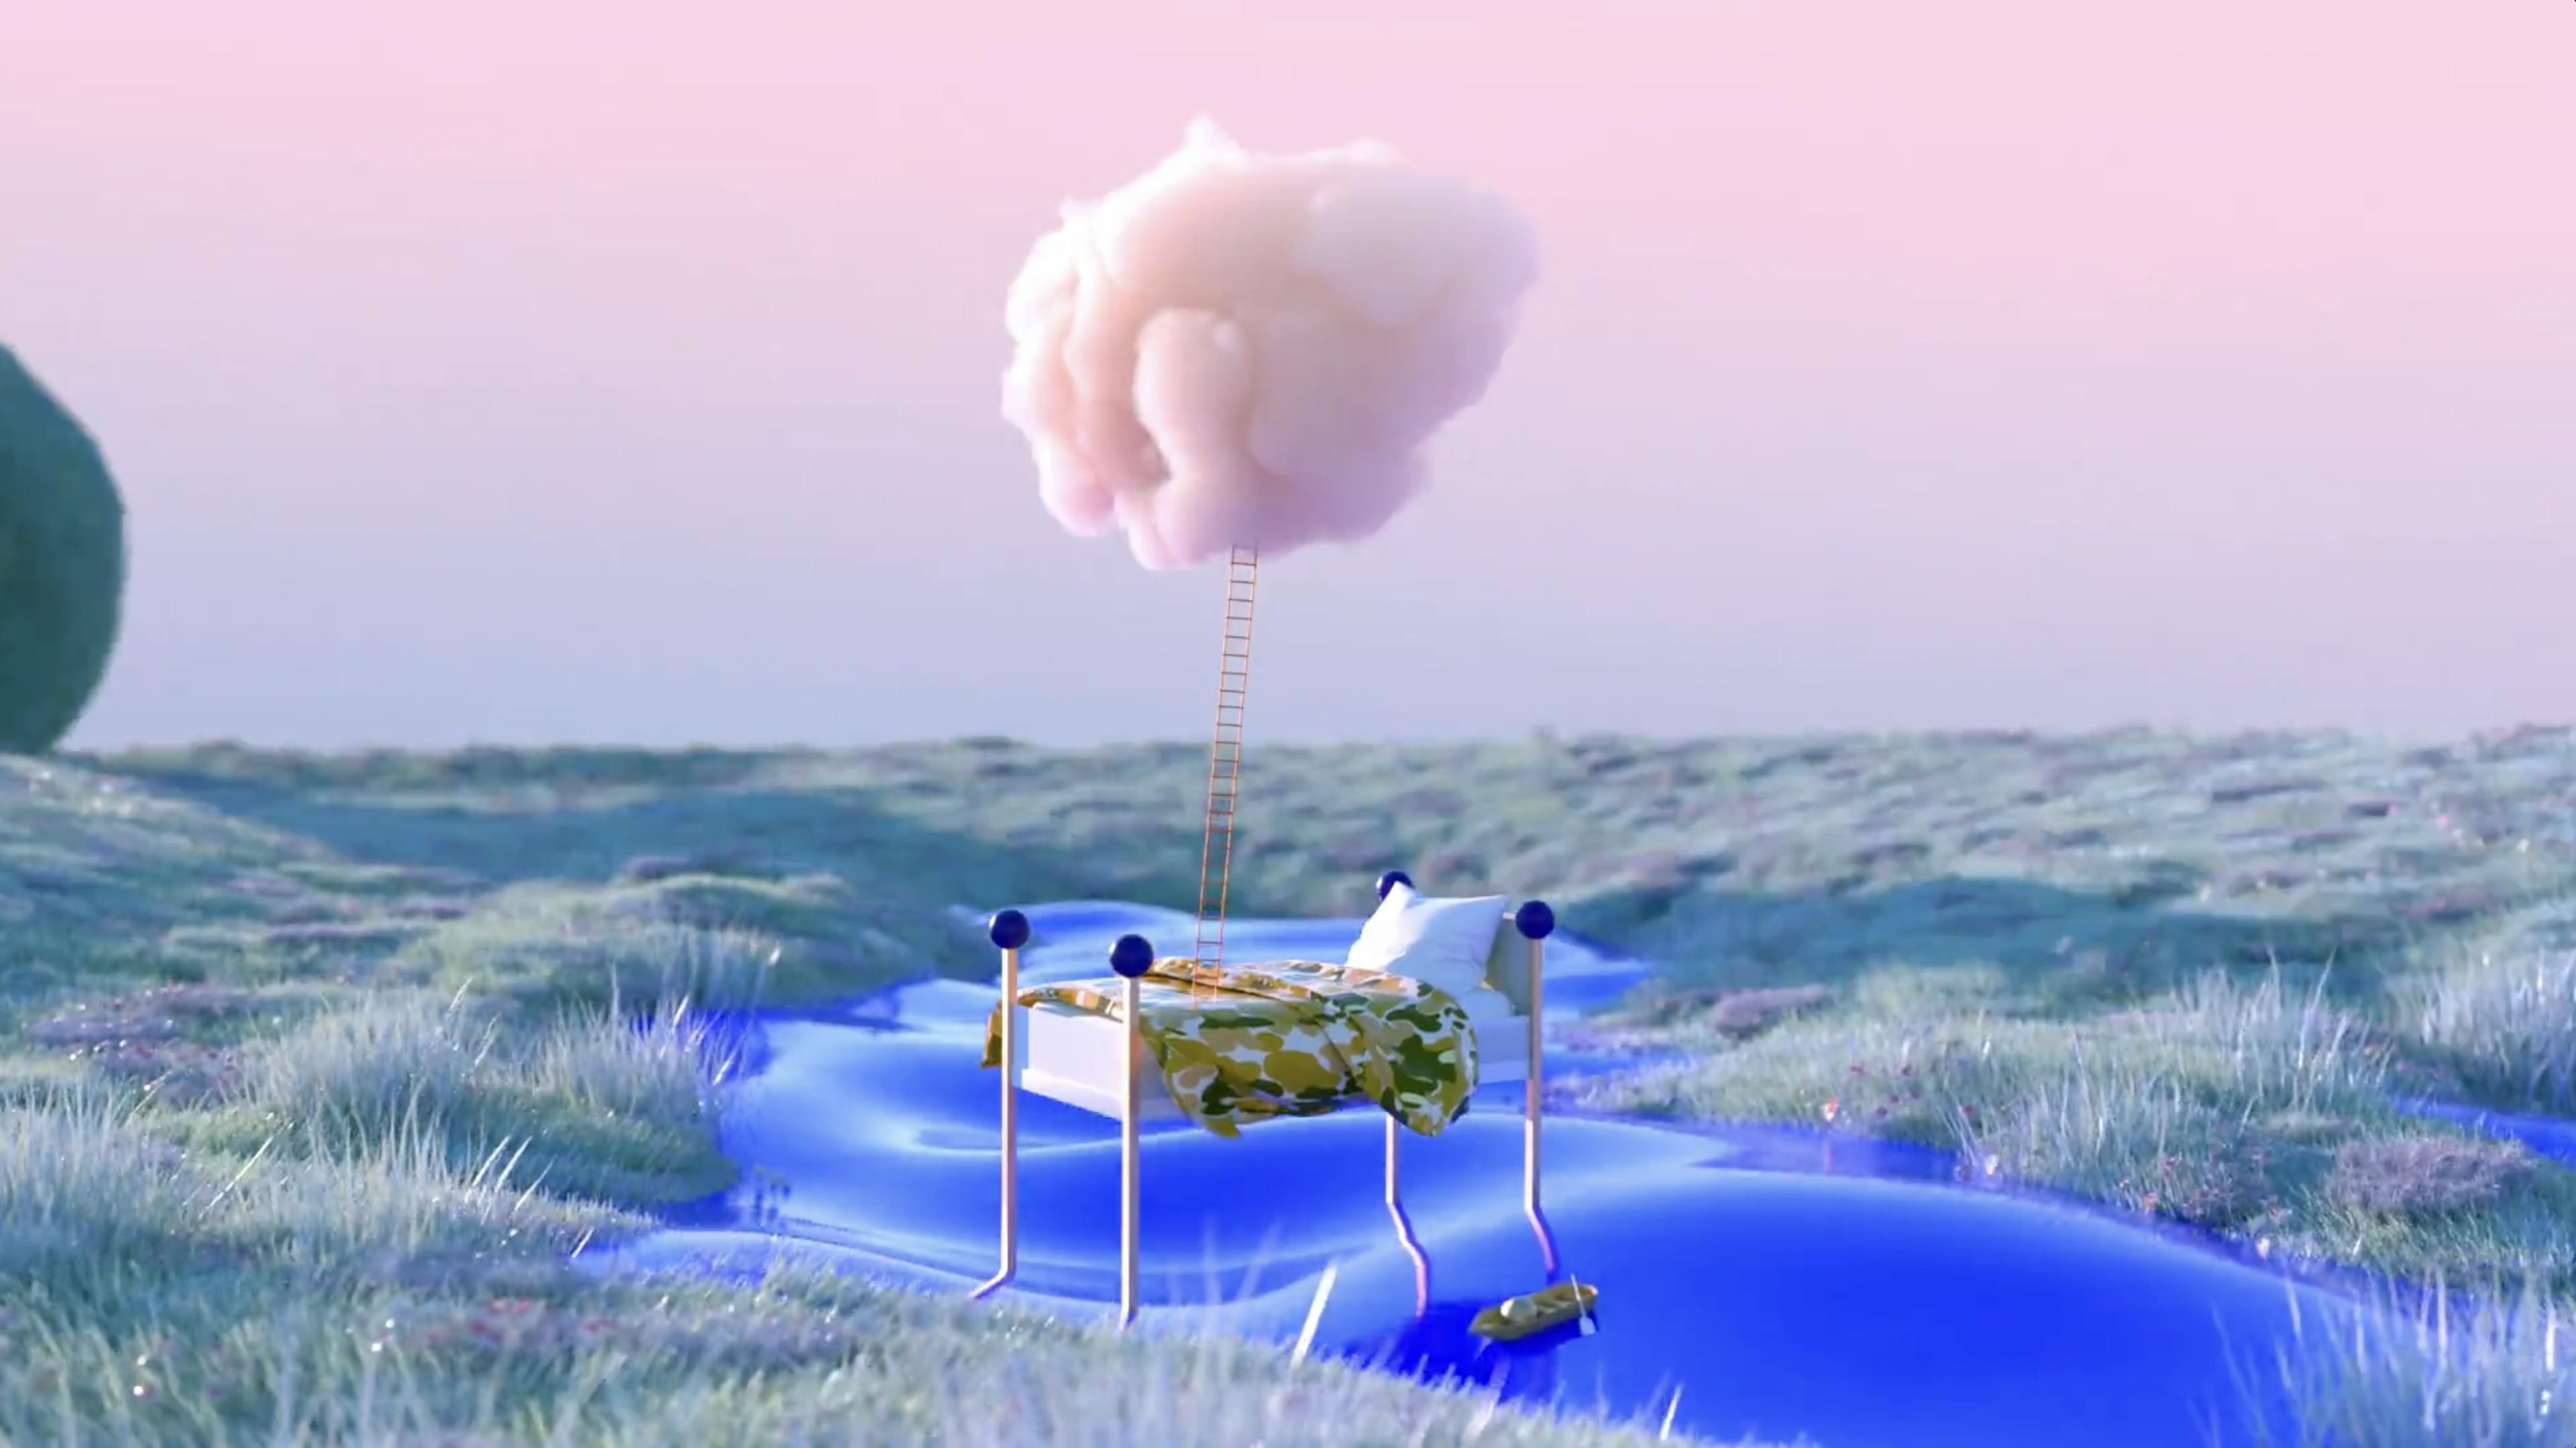 3D scene of bed and ladder to cloud